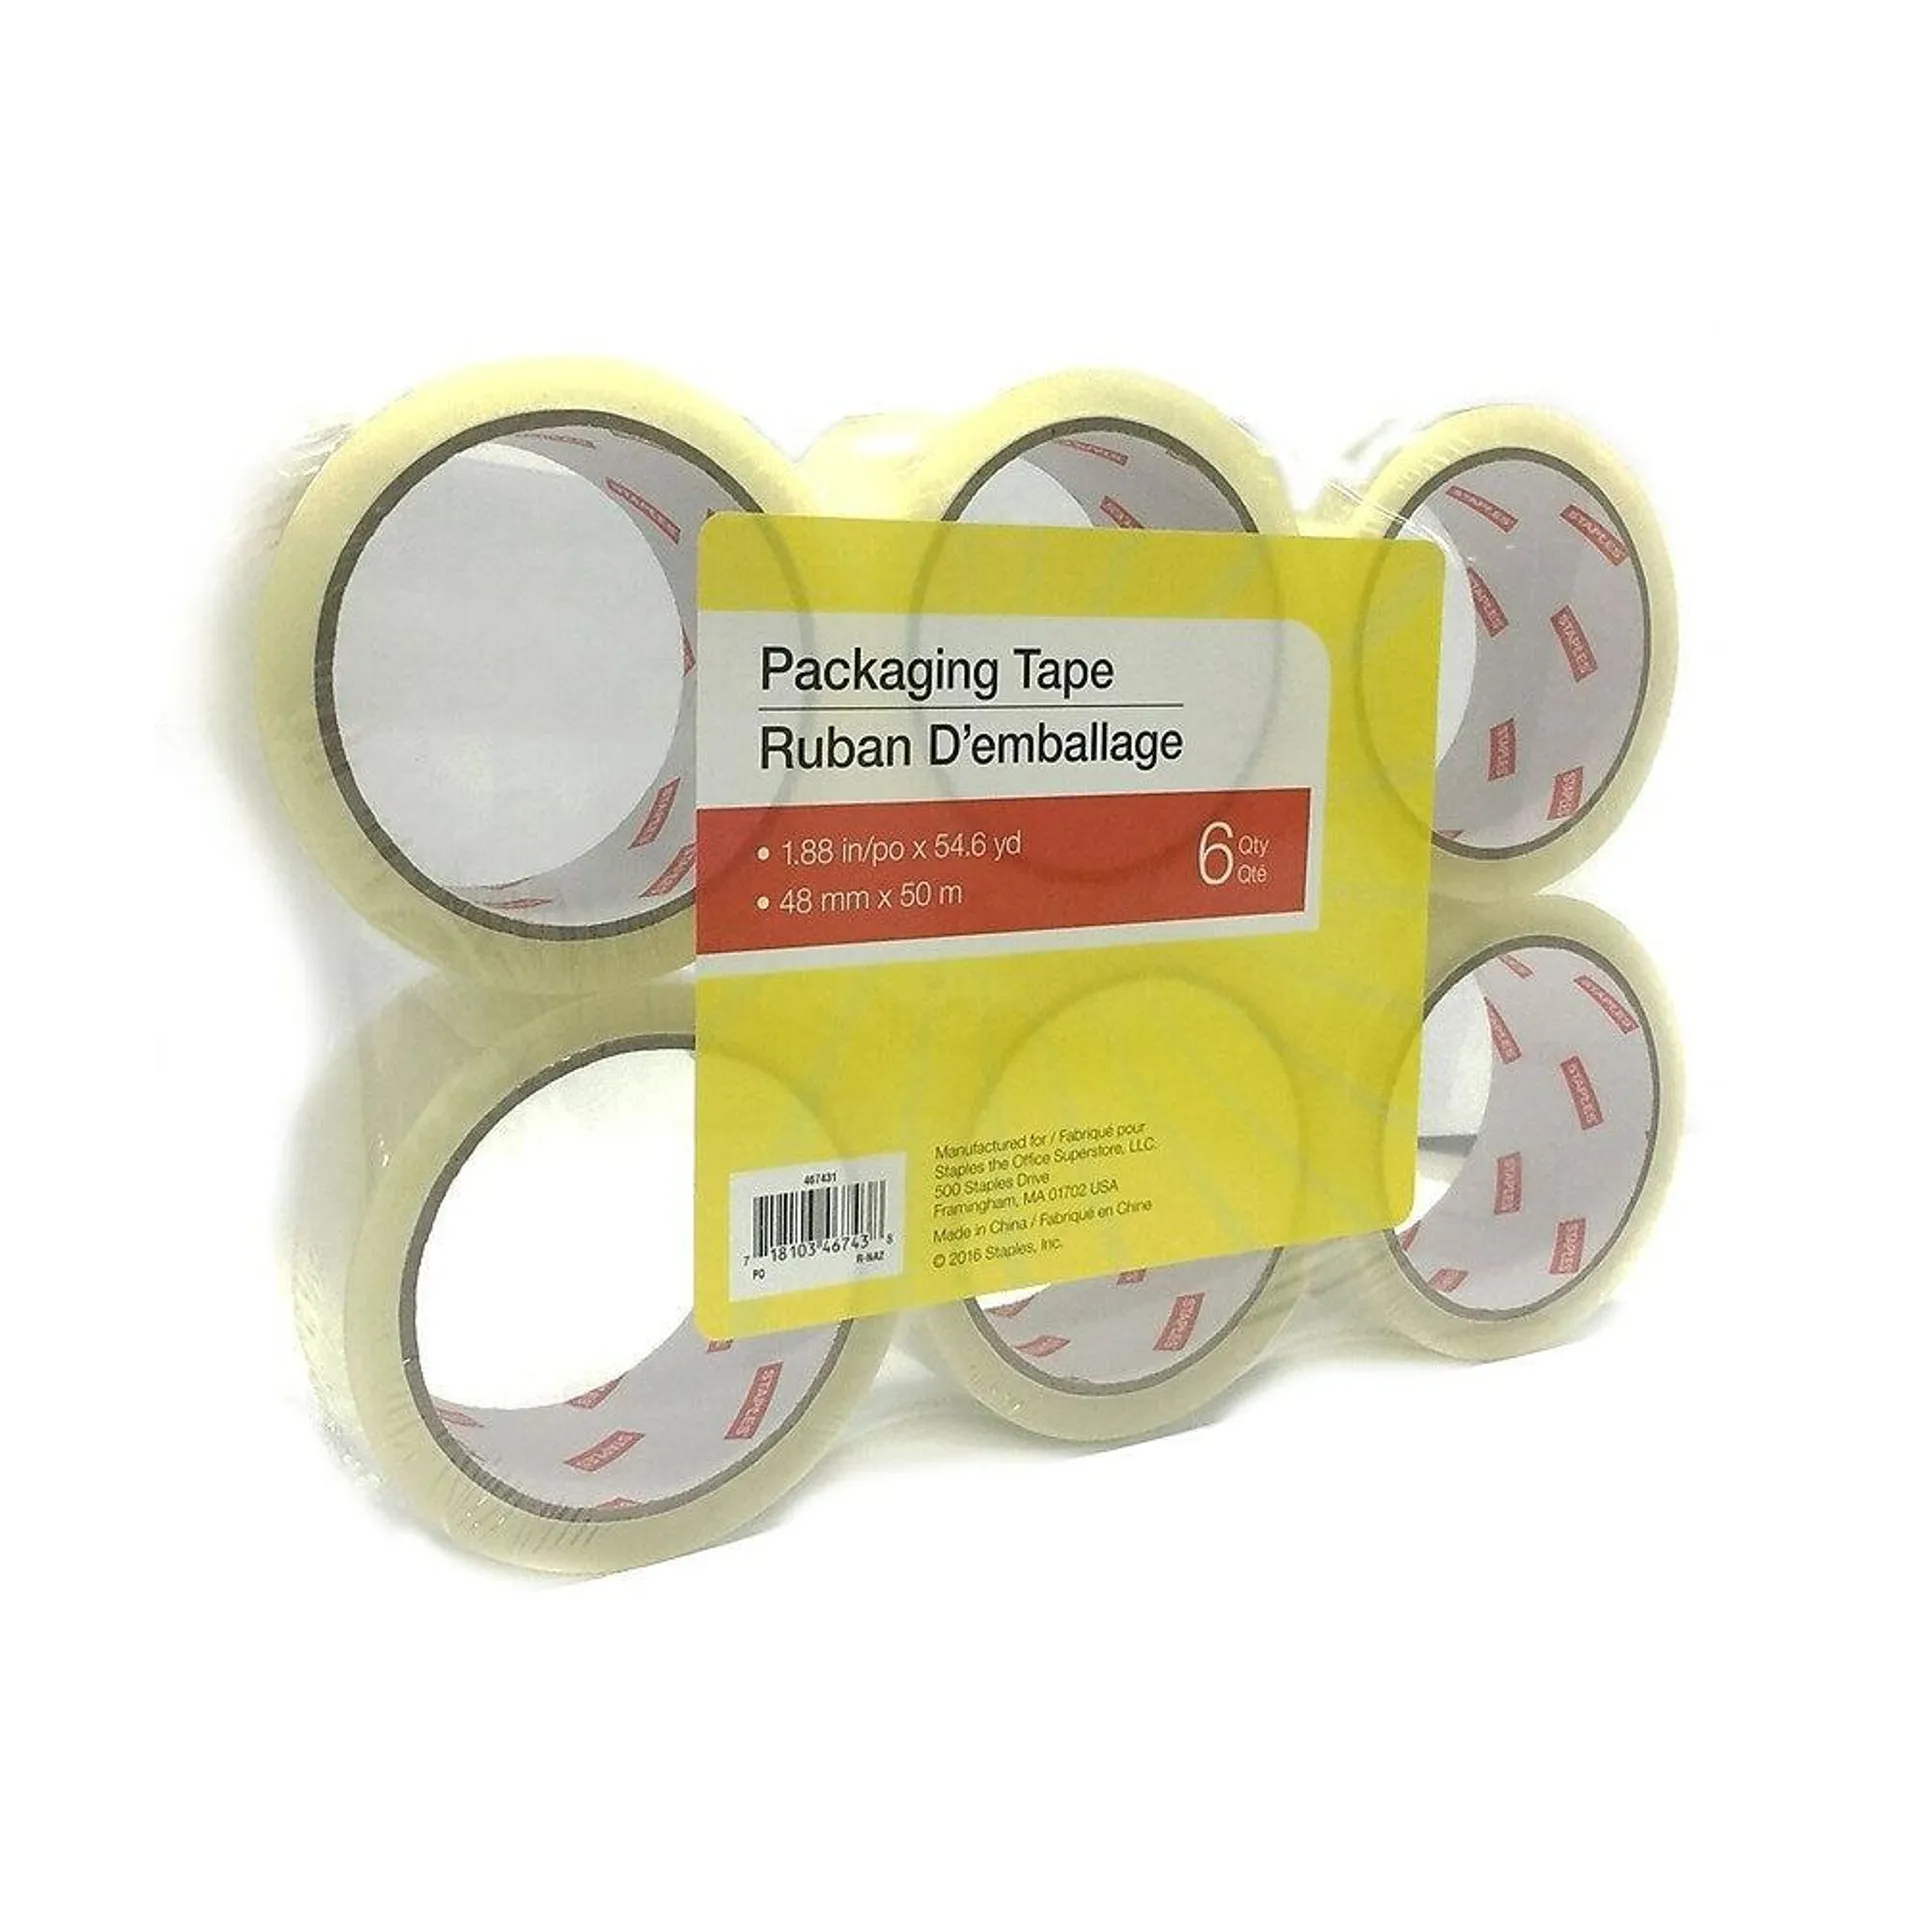 Simply Standard-Grade Packaging Tape, 48mm x 50m, Clear, 6 Pack